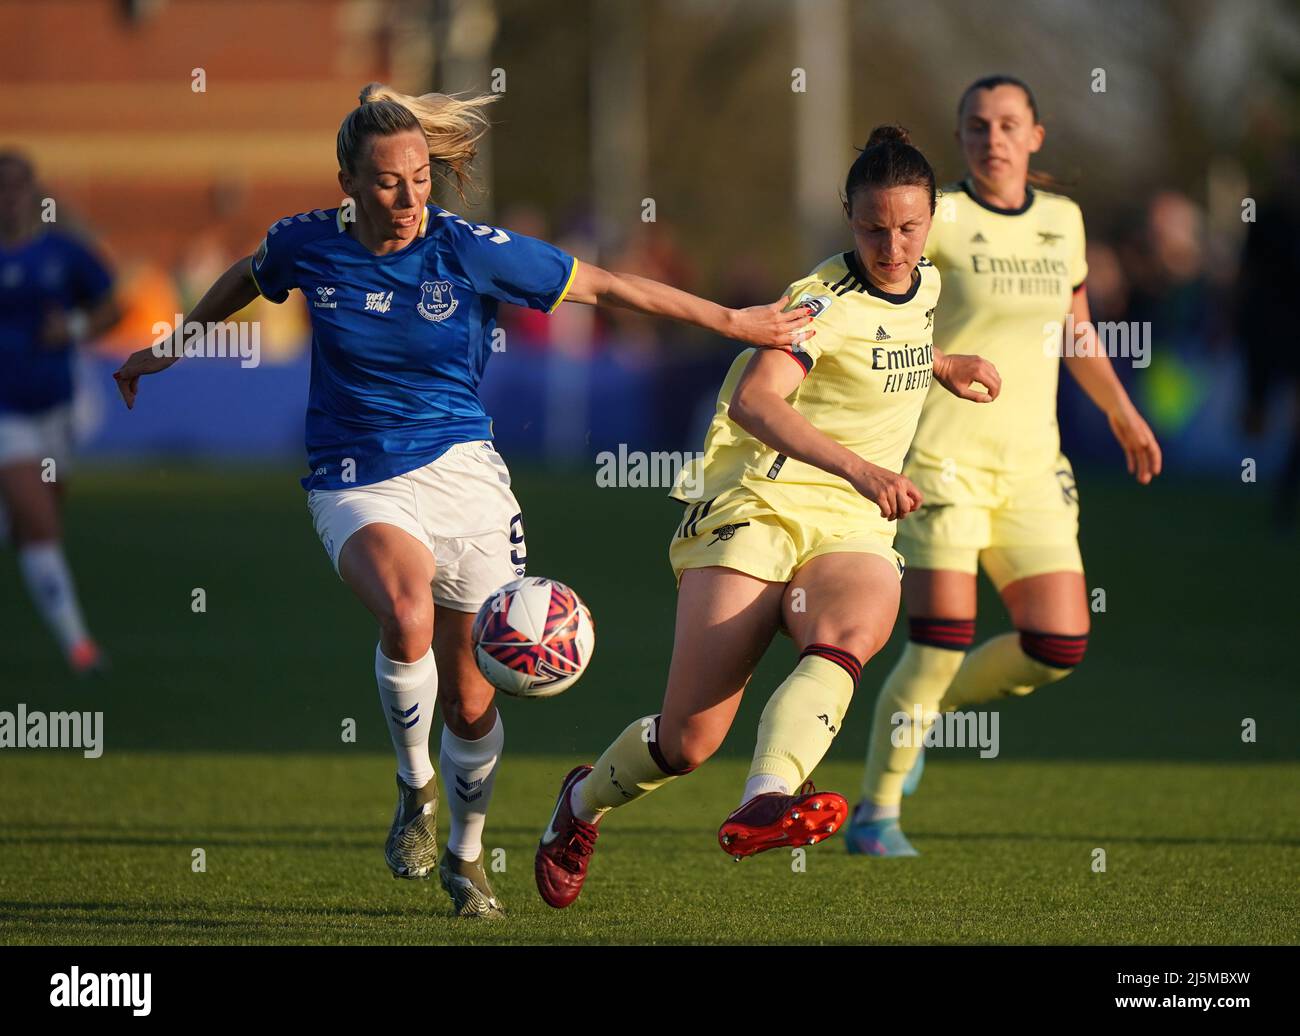 Everton's Toni Duggan (left) and Arsenal's Lotte Wubben-Moy battle for the ball during the Barclays FA Women's Super League match at Walton Hall Park, Liverpool. Picture date: Sunday April 24, 2022. Stock Photo